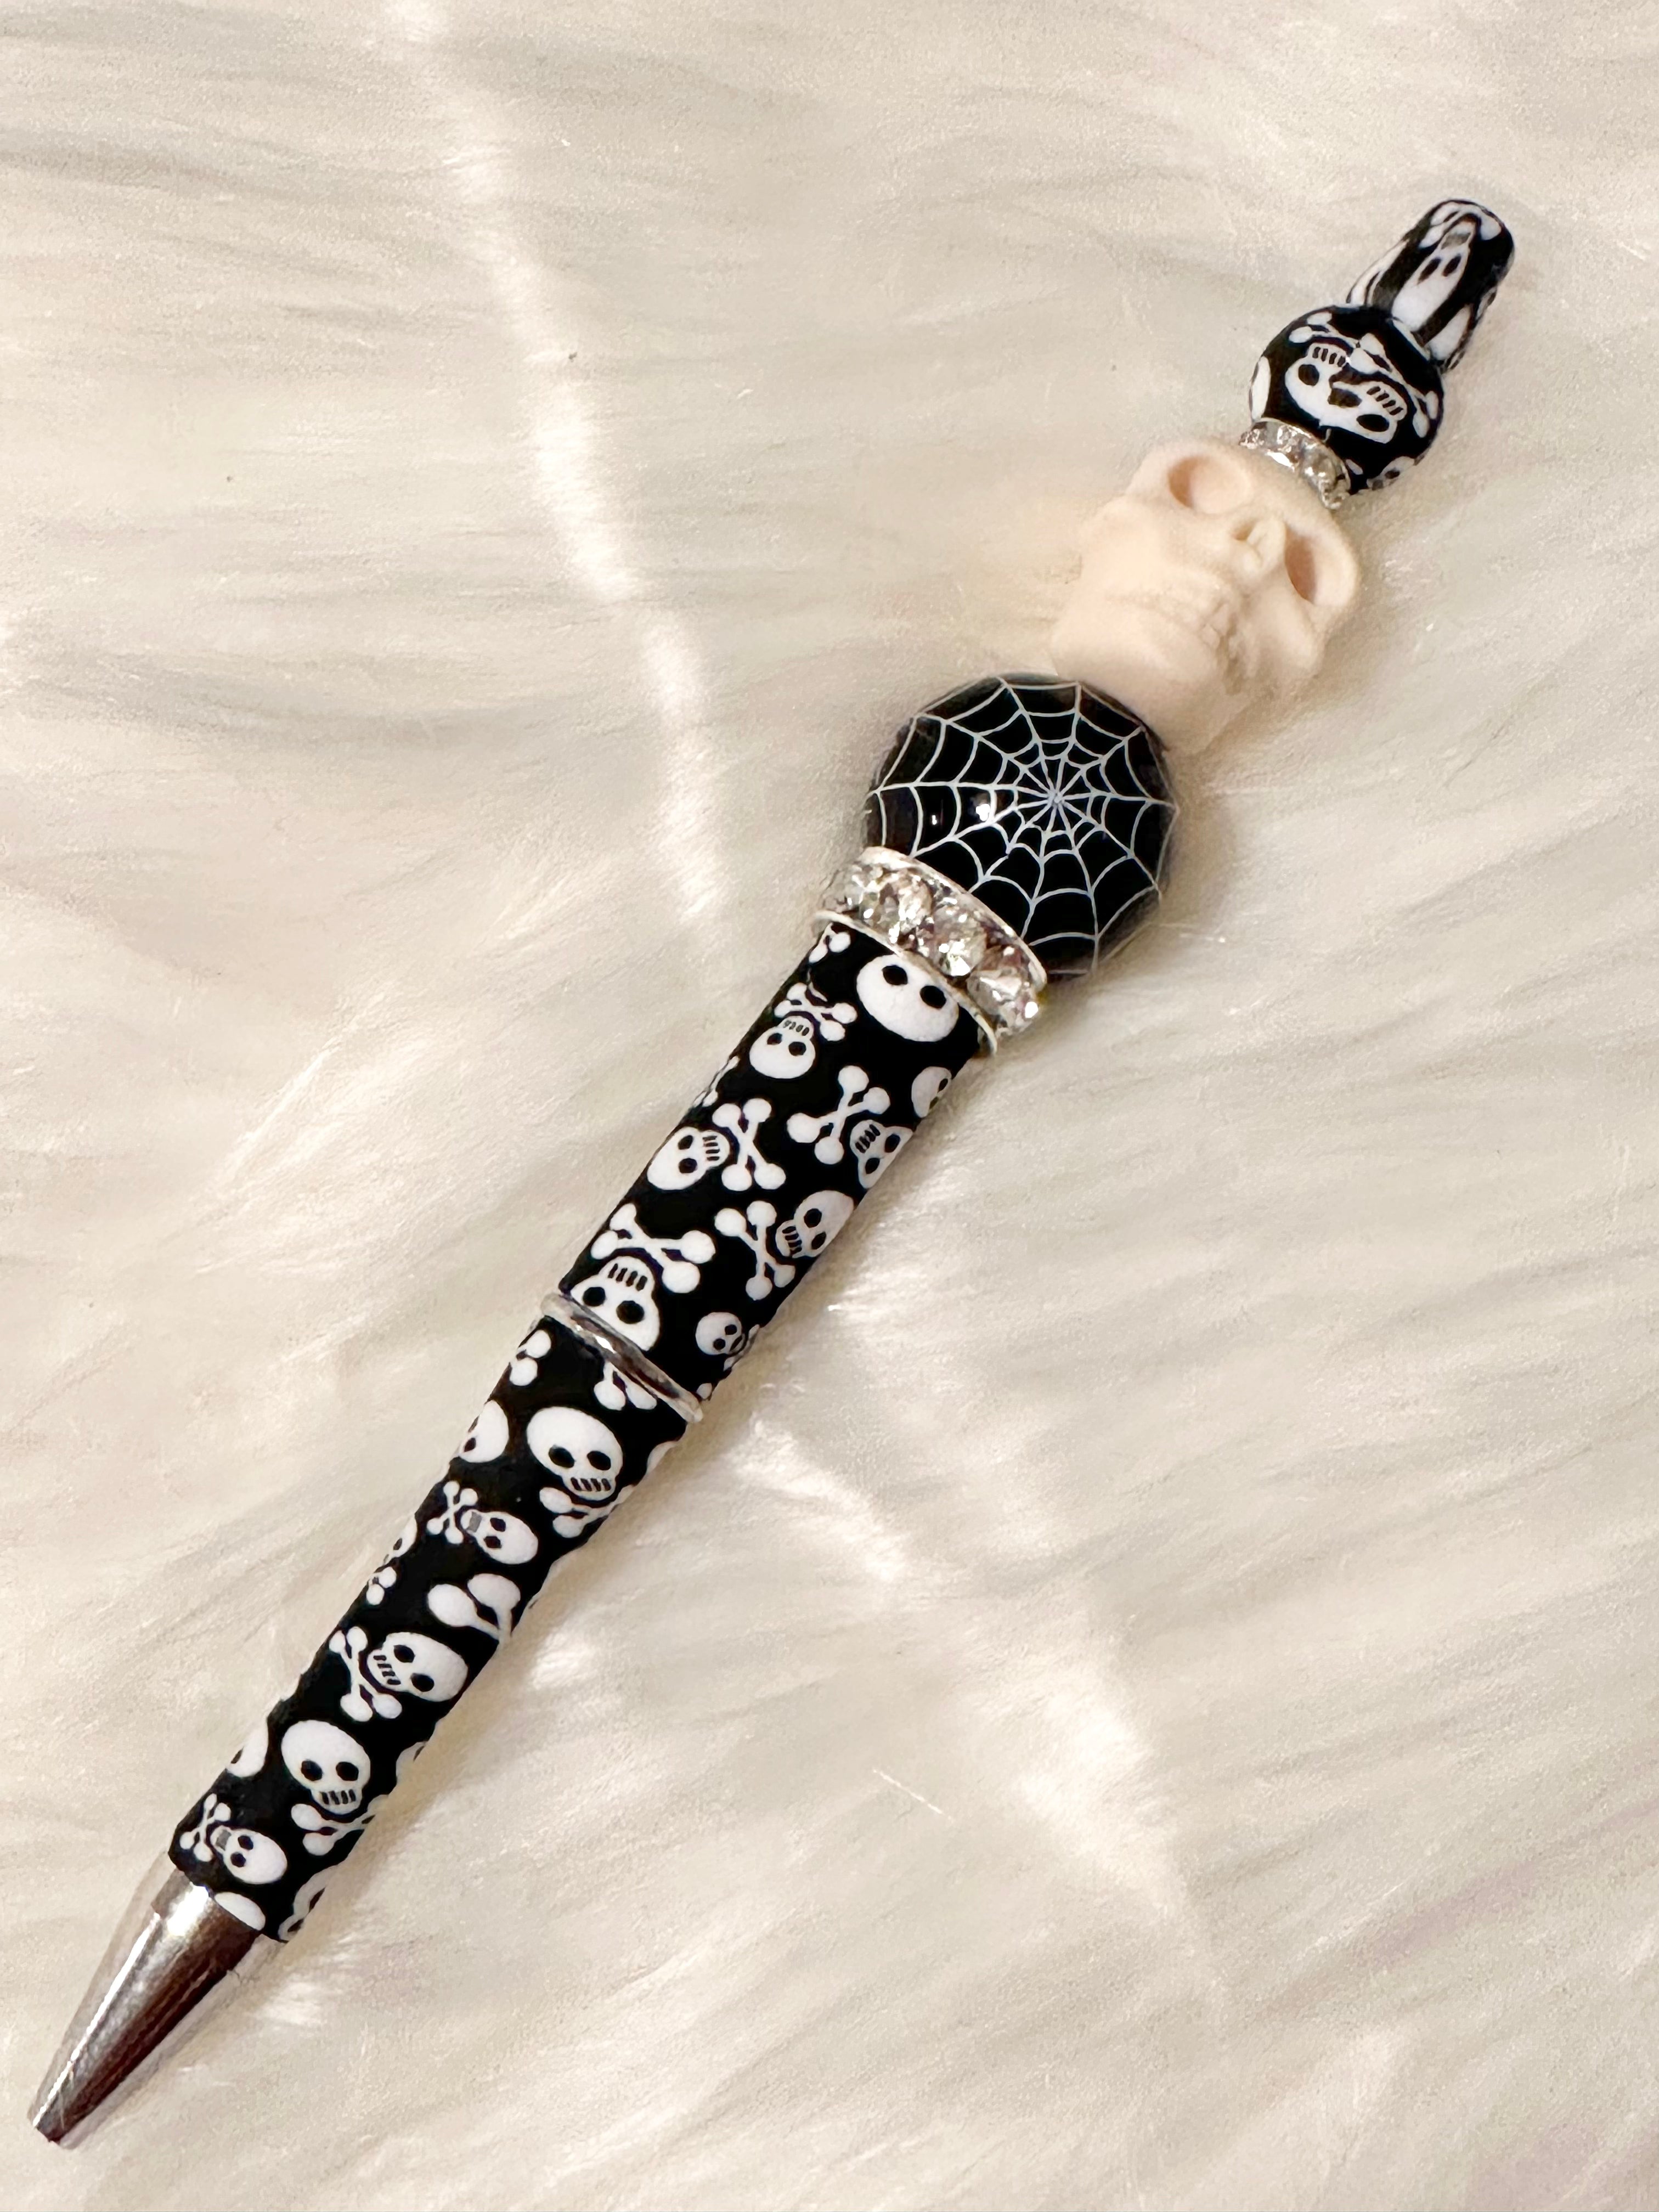 Goth and Glam Decorated Pen